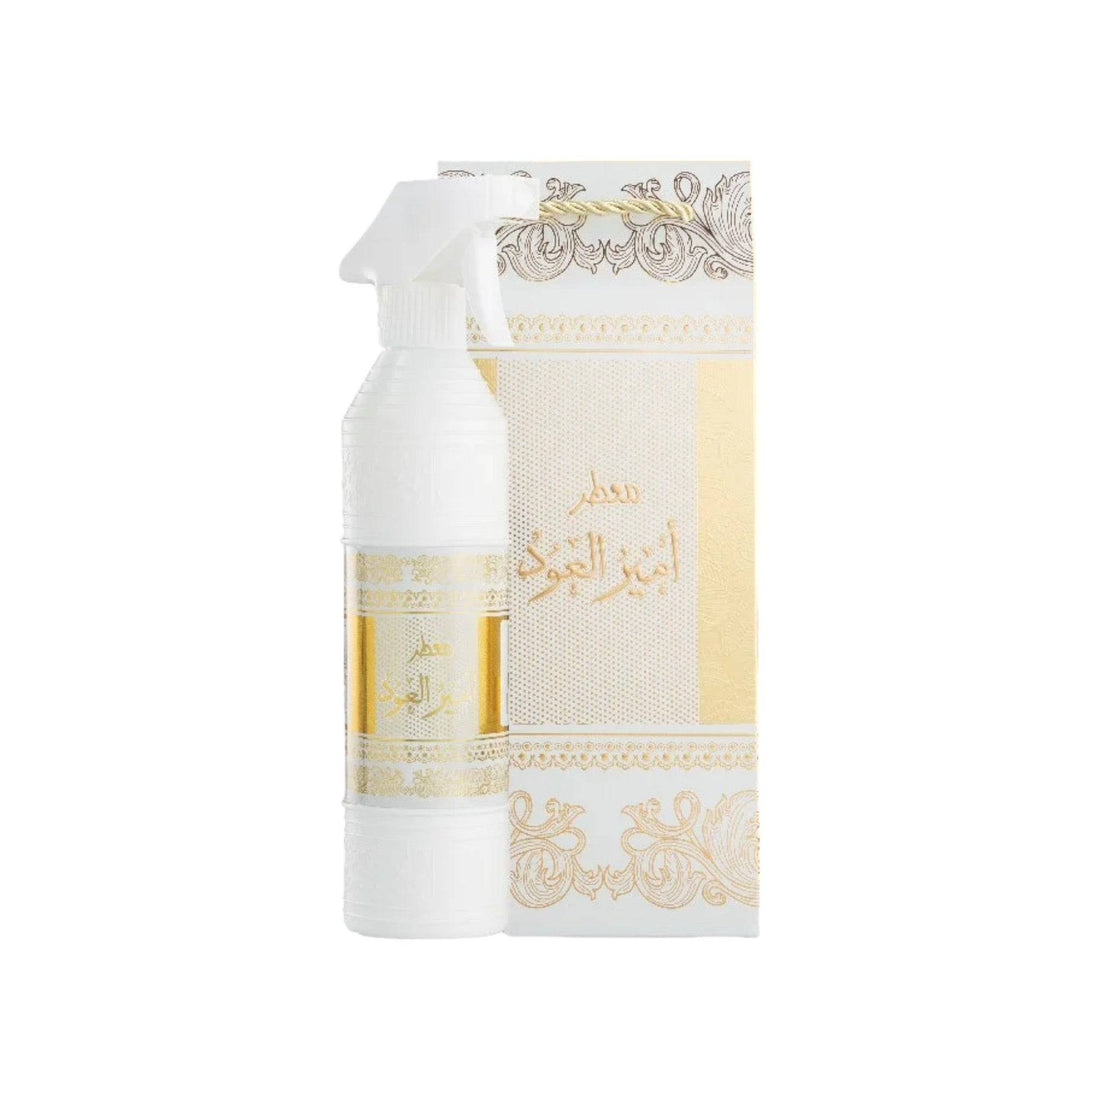 500 ml bottle of Ameer Al Oud Air Freshener, displaying its sleek design and highlighting its alcohol-free, oriental fragrance notes.